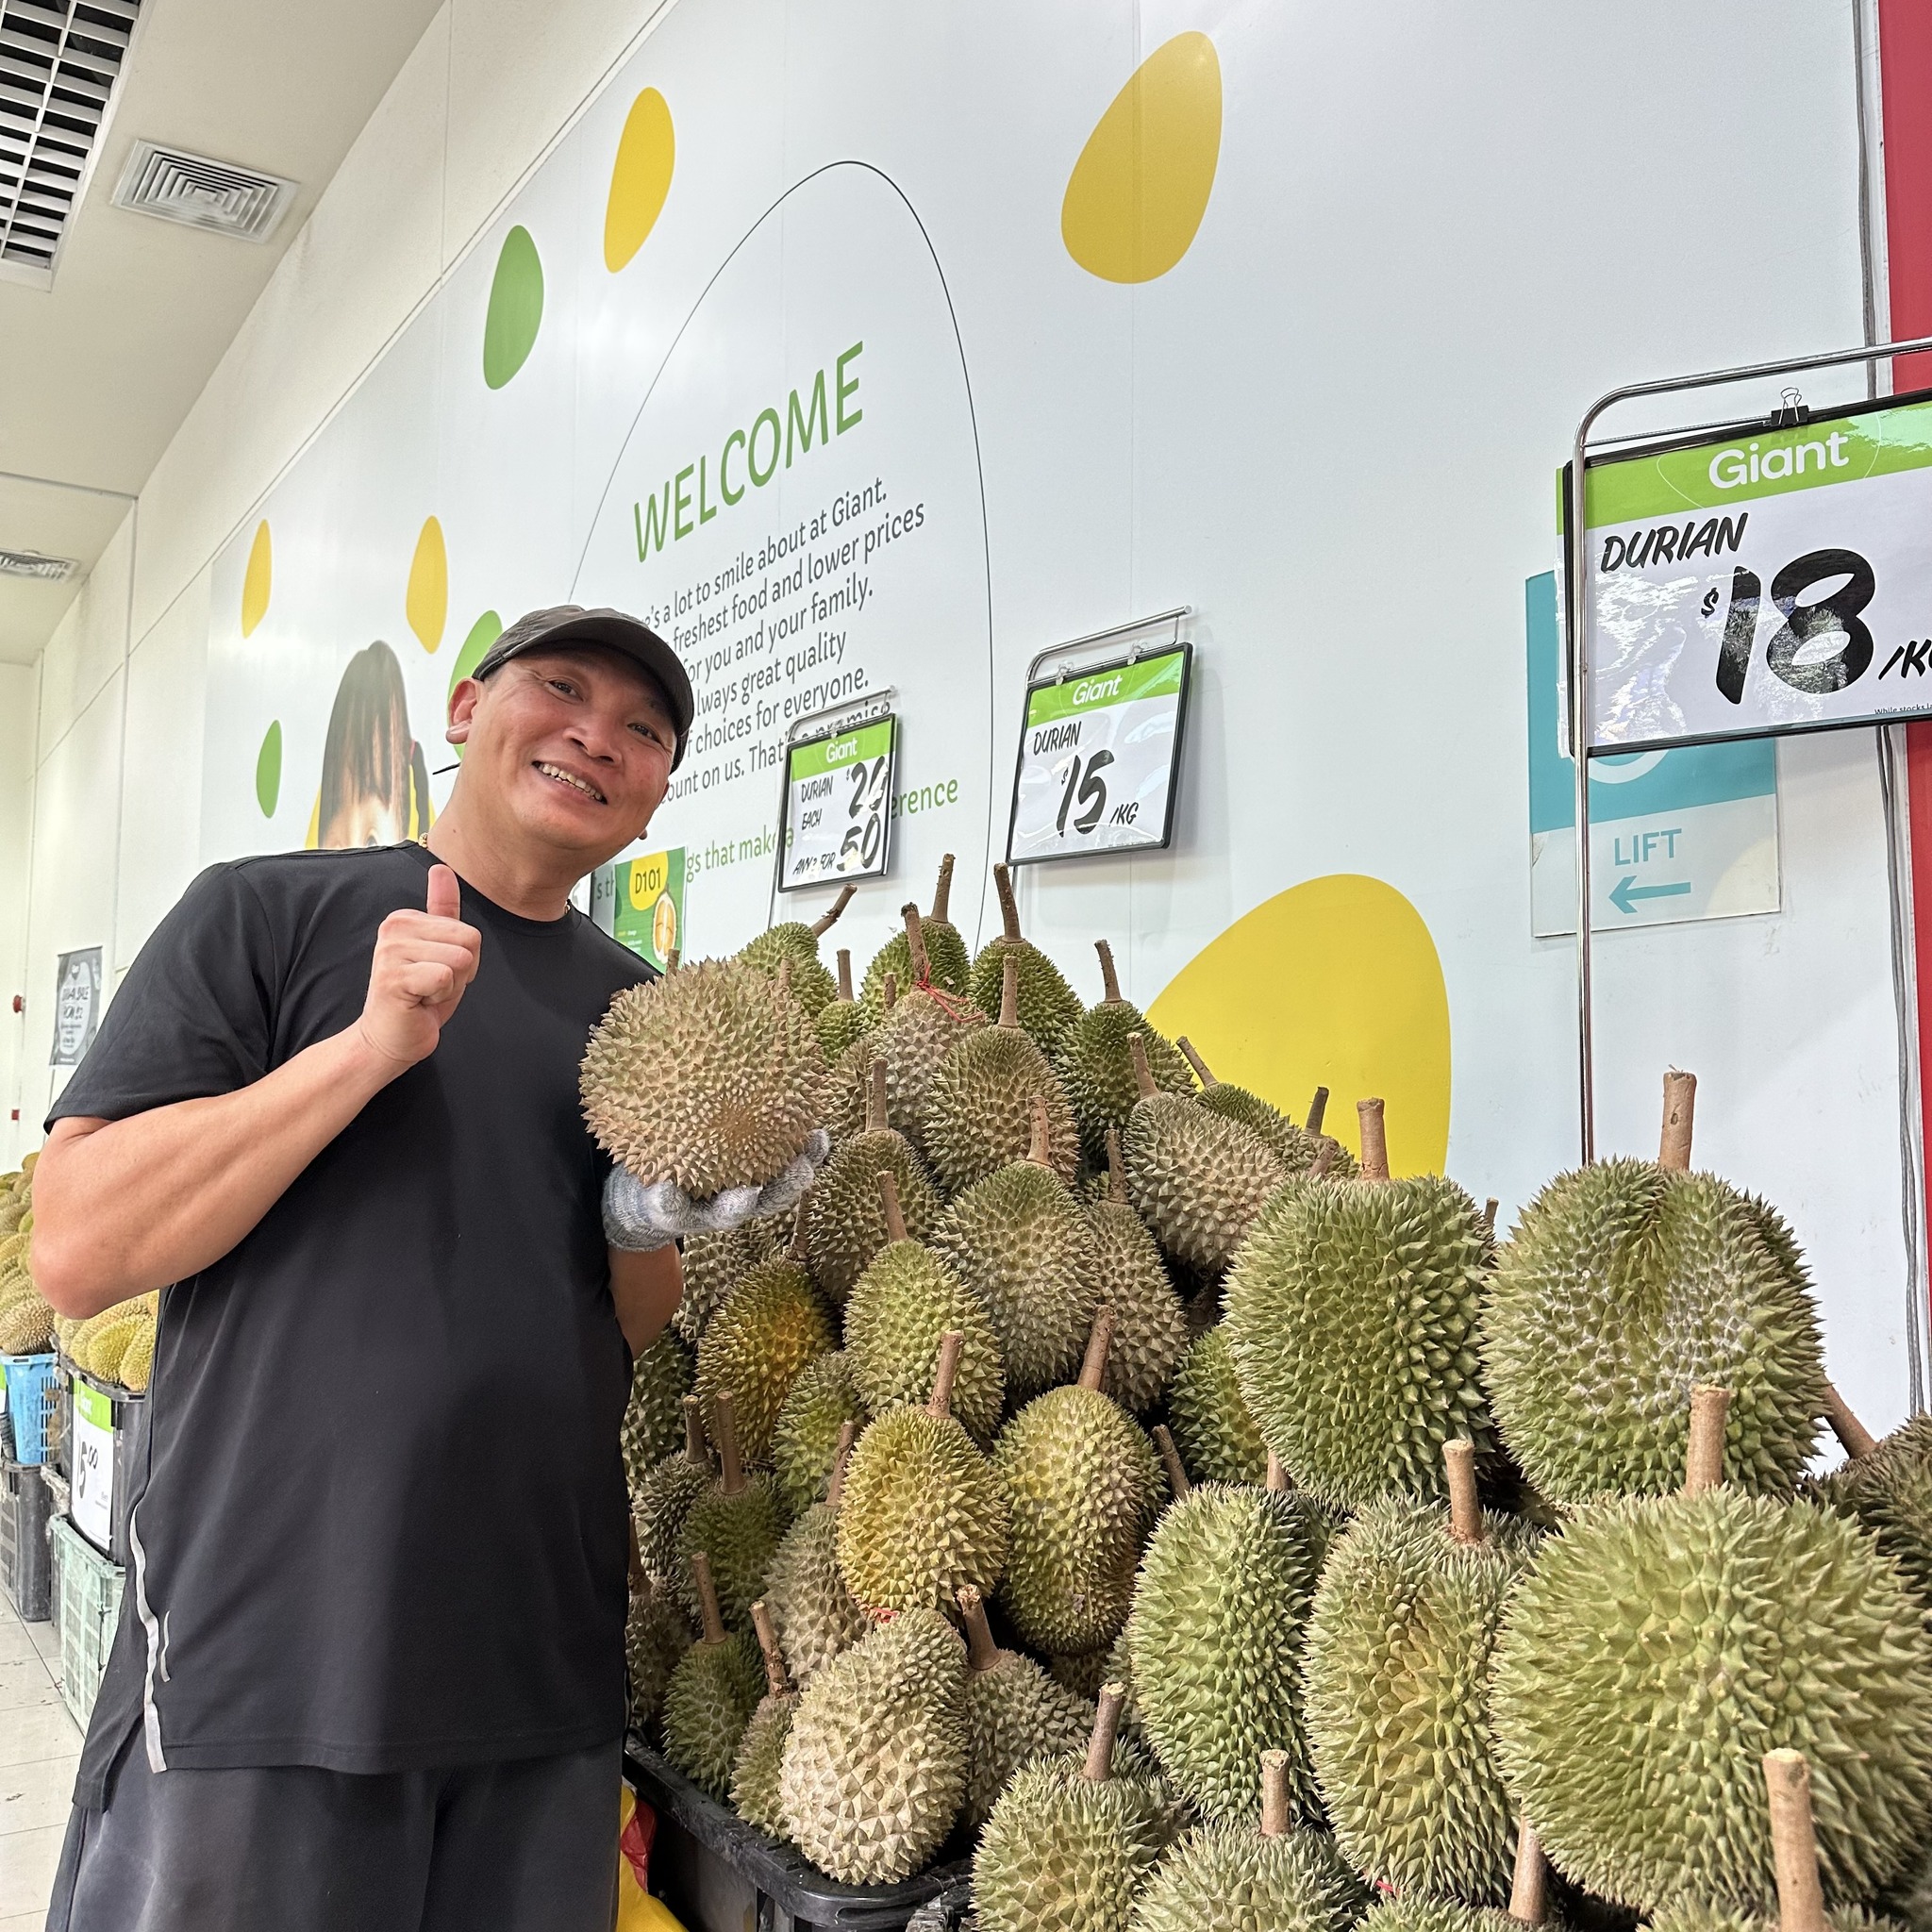 giant tampines durian sale